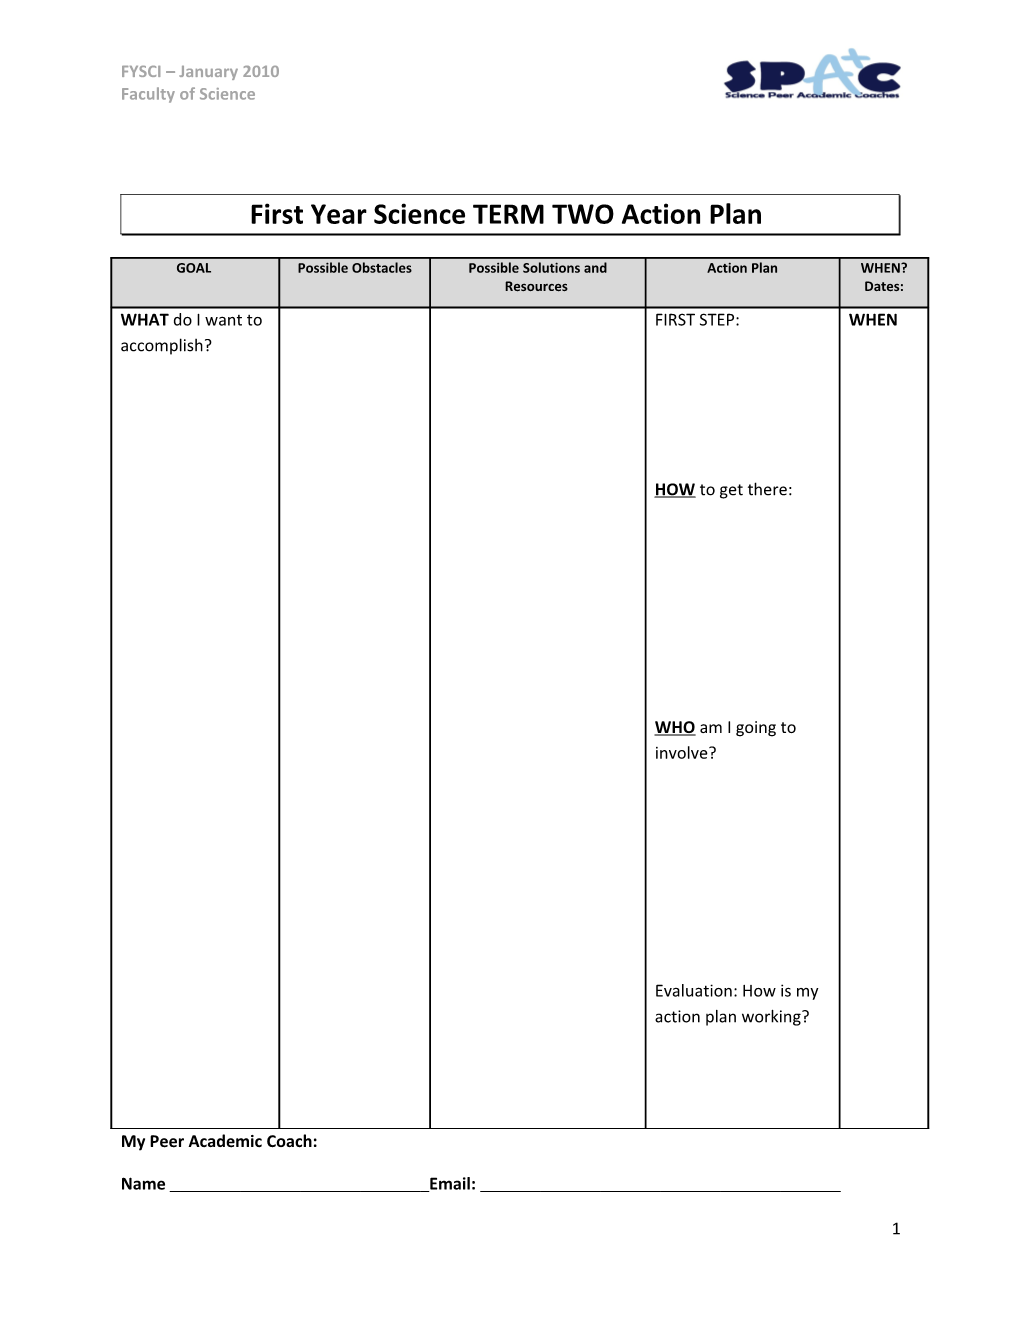 First Year Science TERM TWO Action Plan